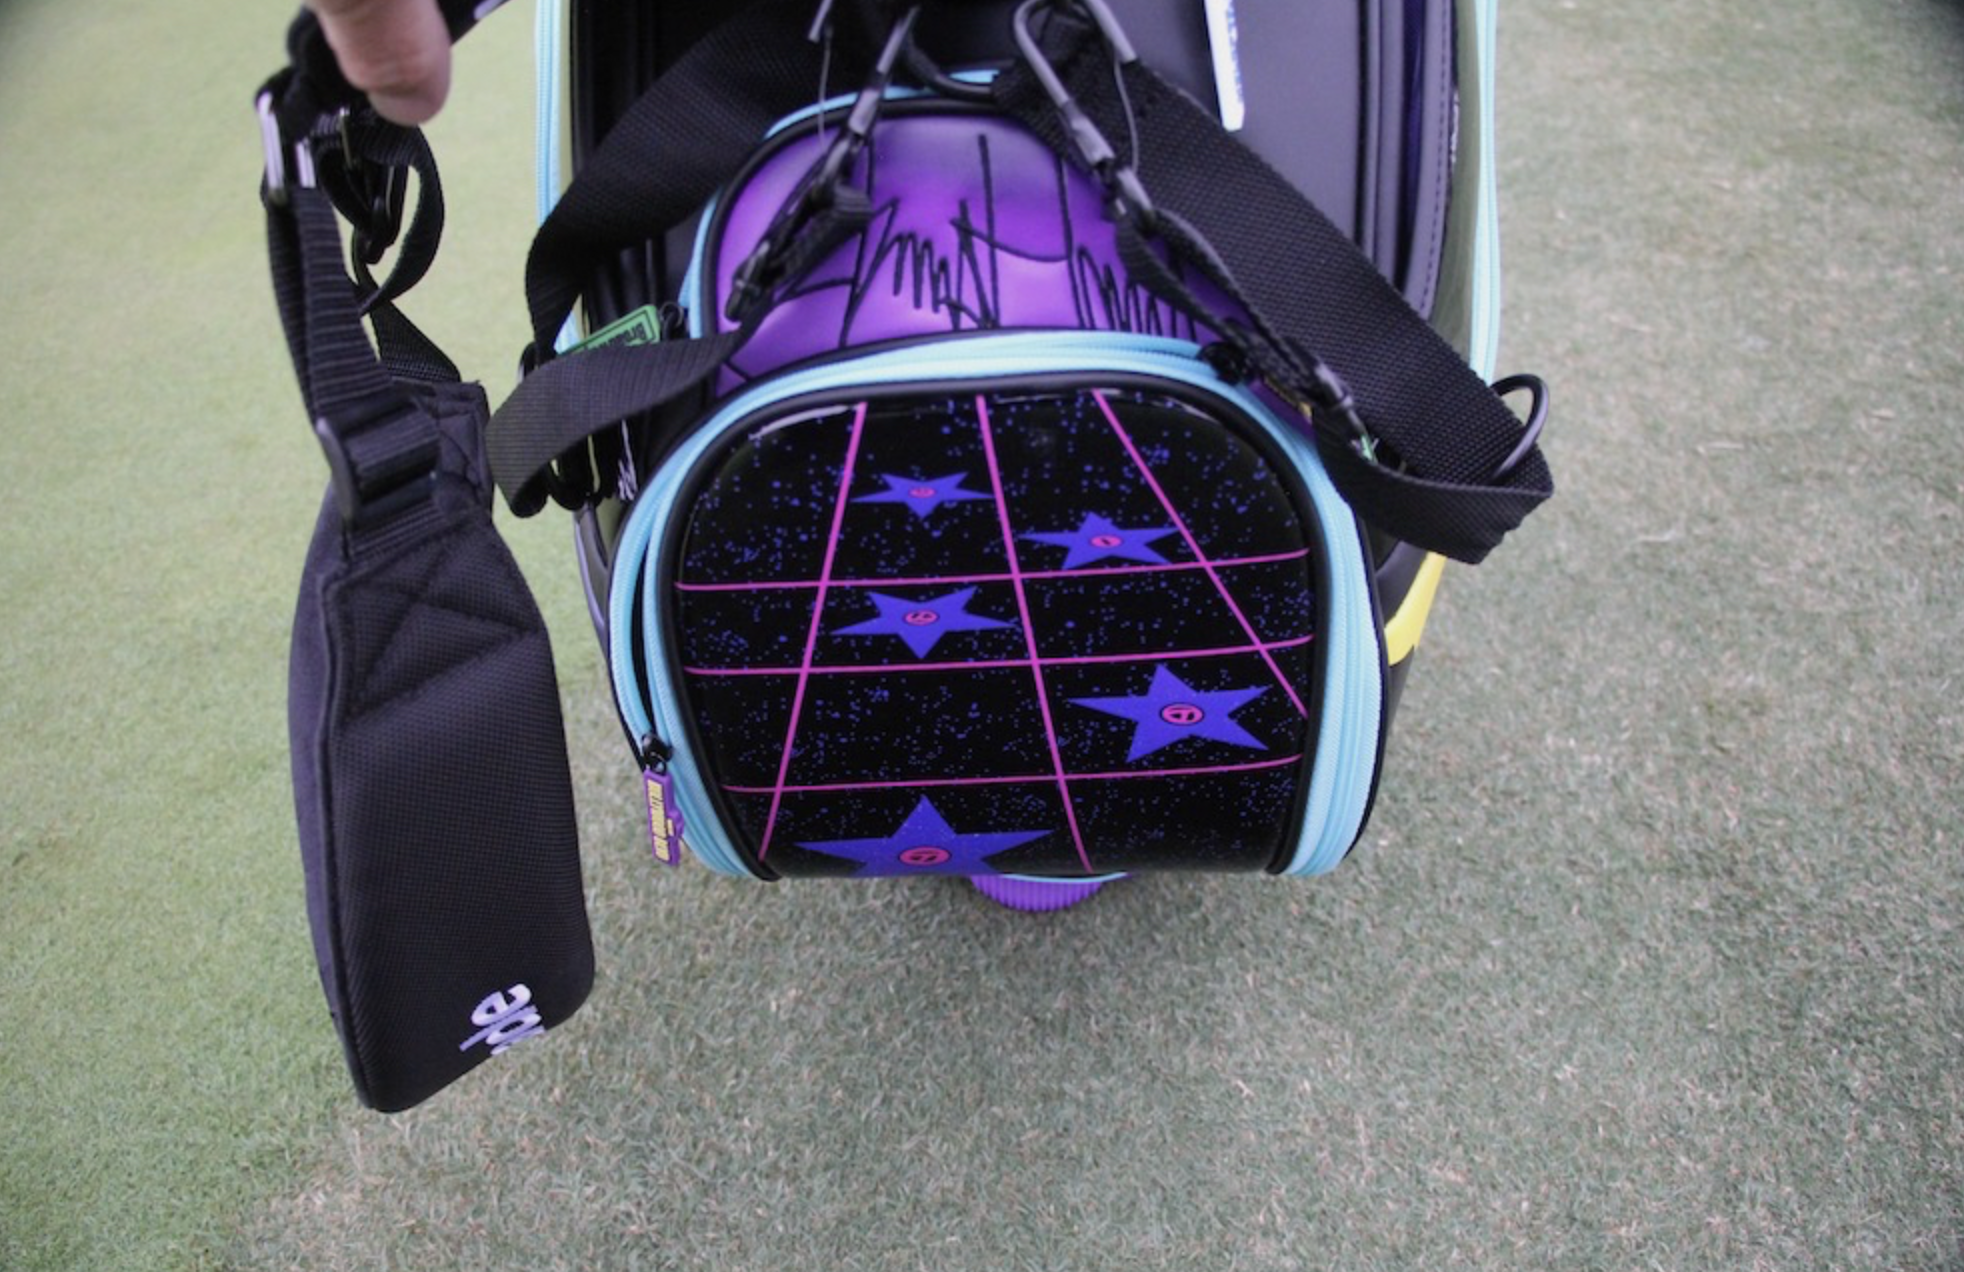 Fill Your Bag with the Gear the Pros Use—Get TaylorMade Golf